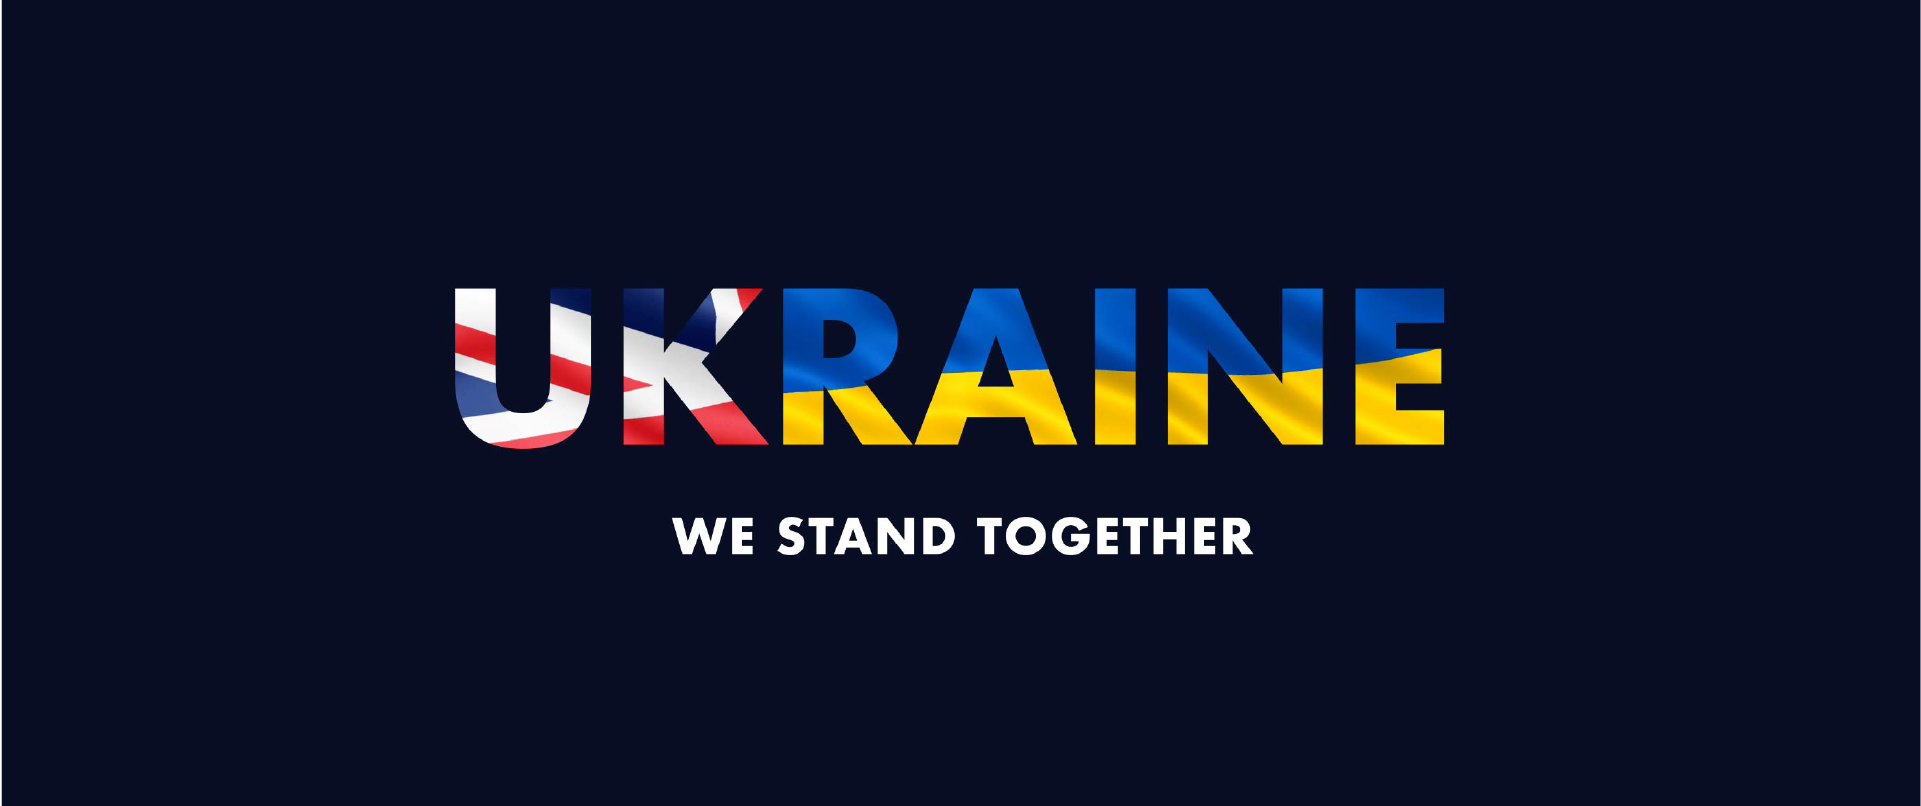 Image showing the word 'Ukraine' with the UK and Ukrainian flags merged